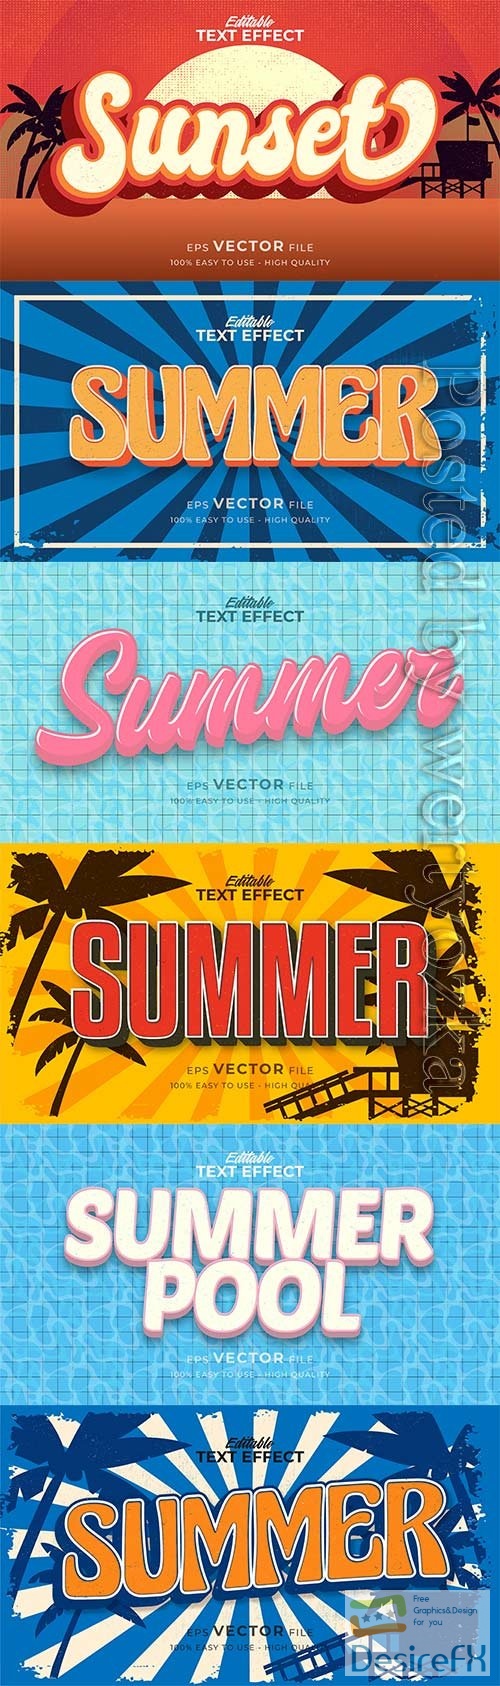 Retro summer holiday text in grunge style theme in vector vol 2